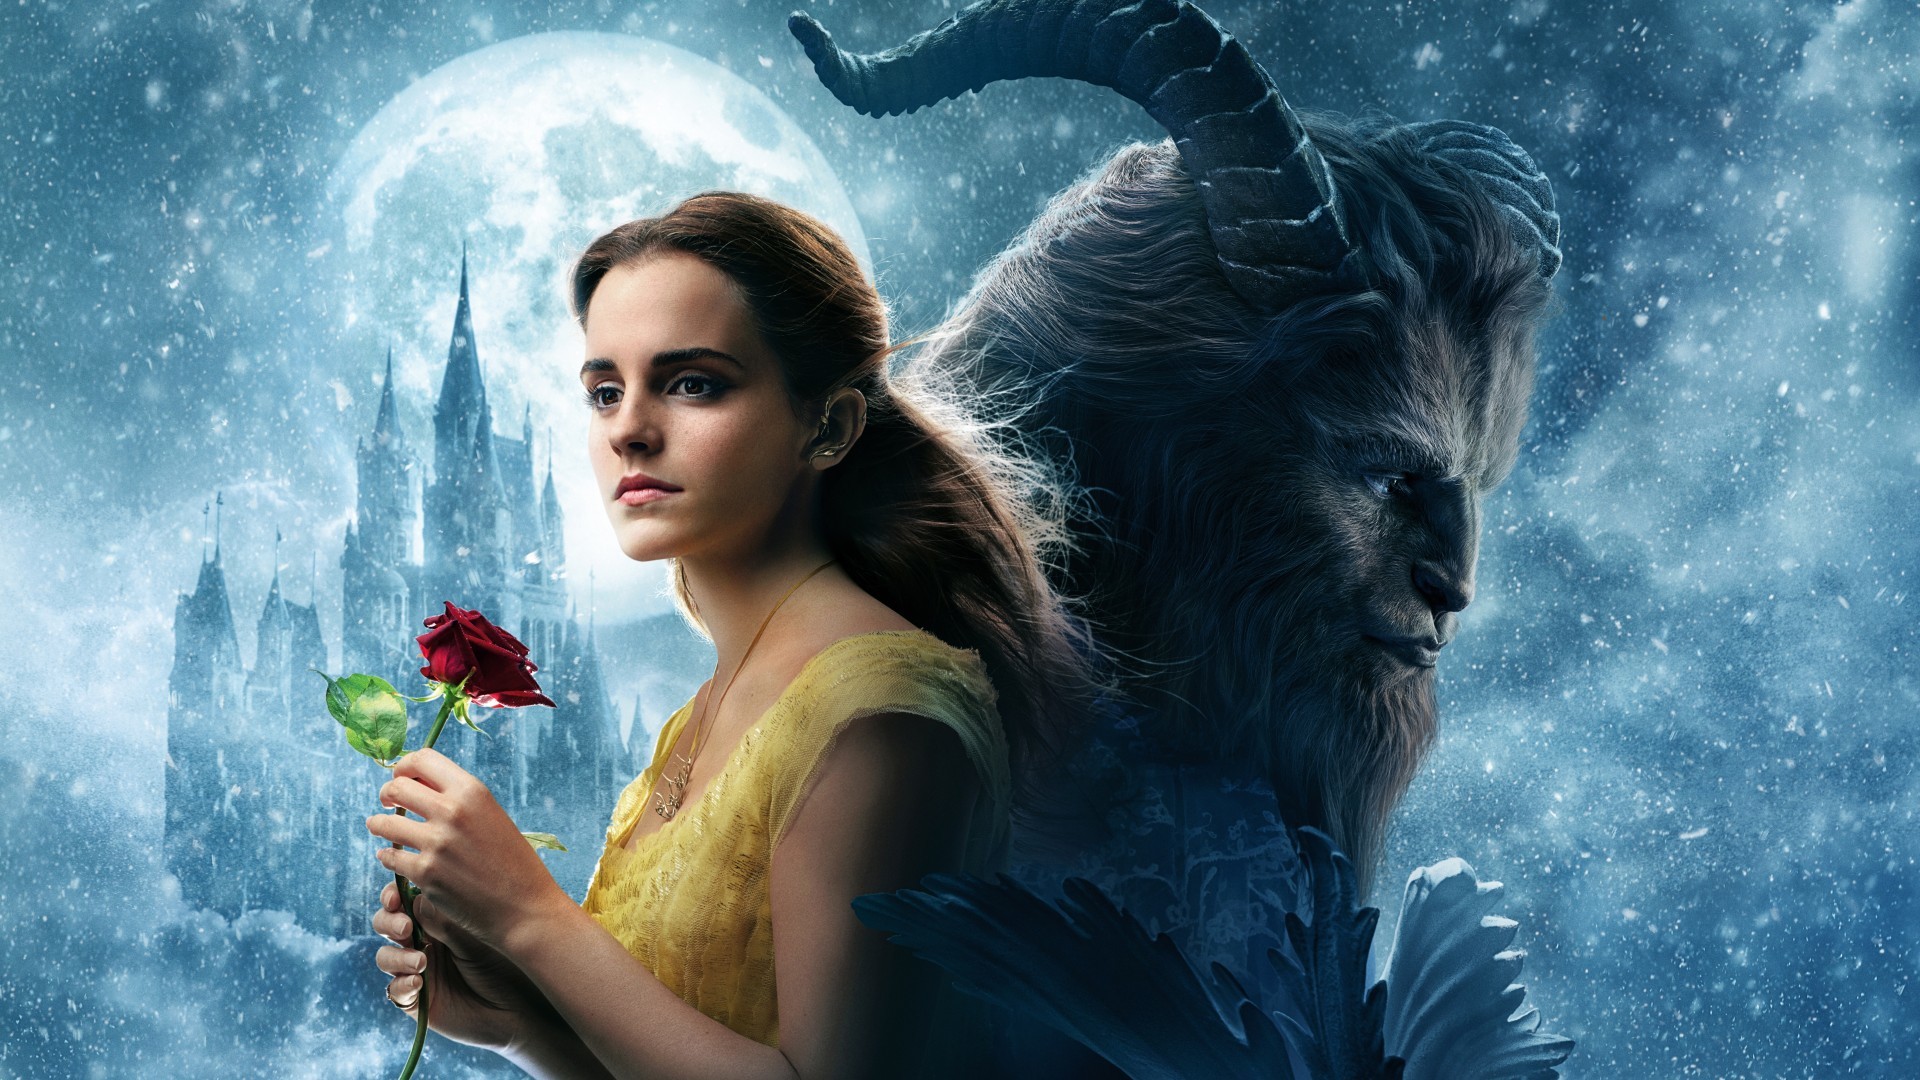 1920x1080 Emma Watson Beauty and the Beast for Wallpaper Size 1920Ã1080